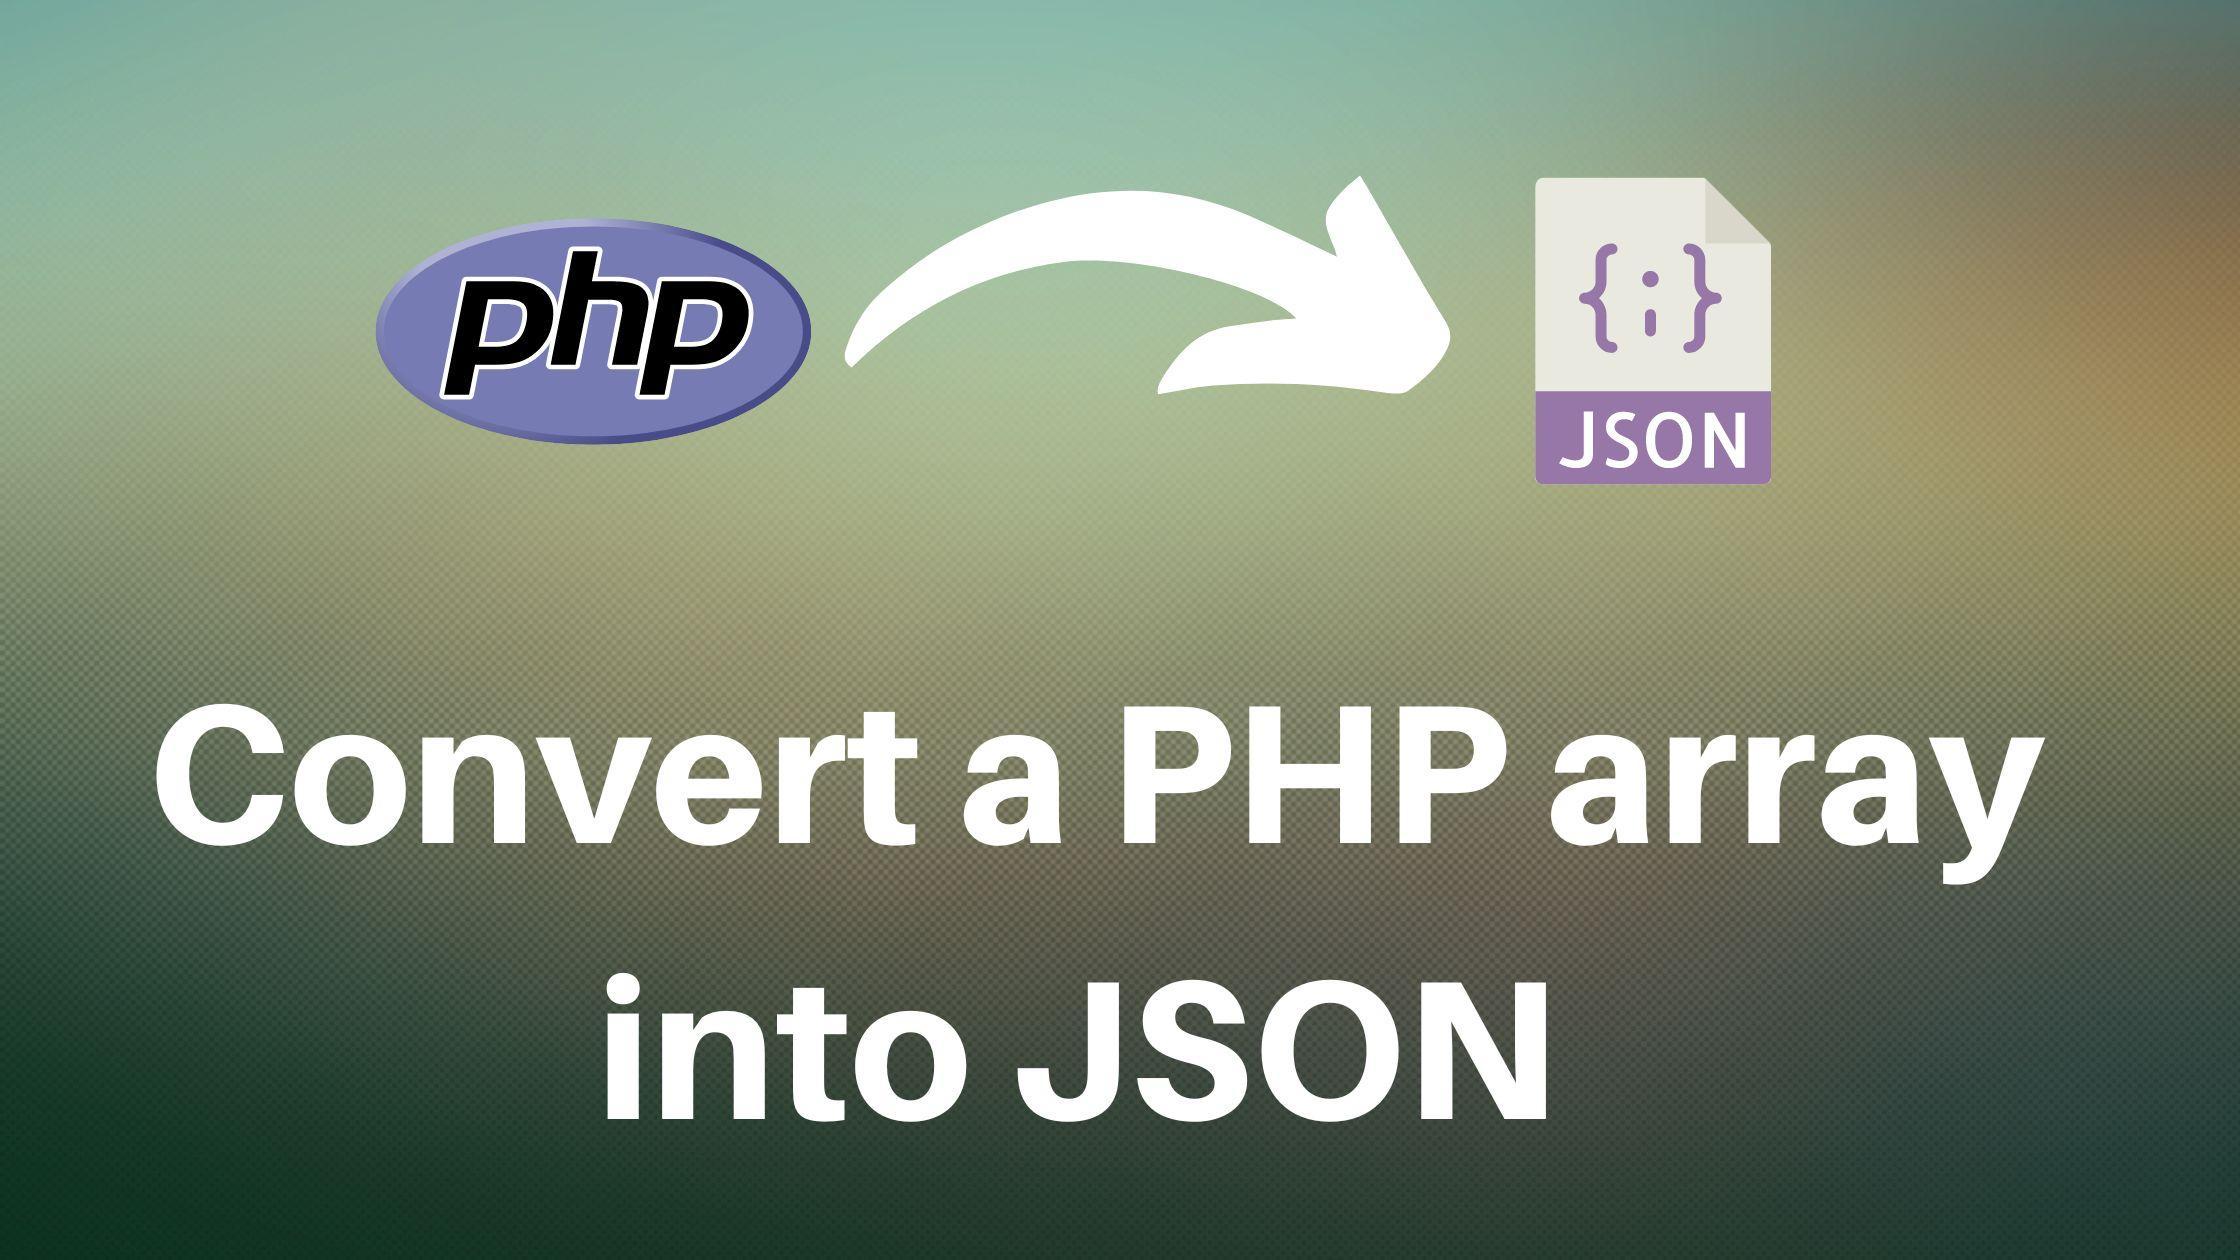 How to convert a PHP array into JSON